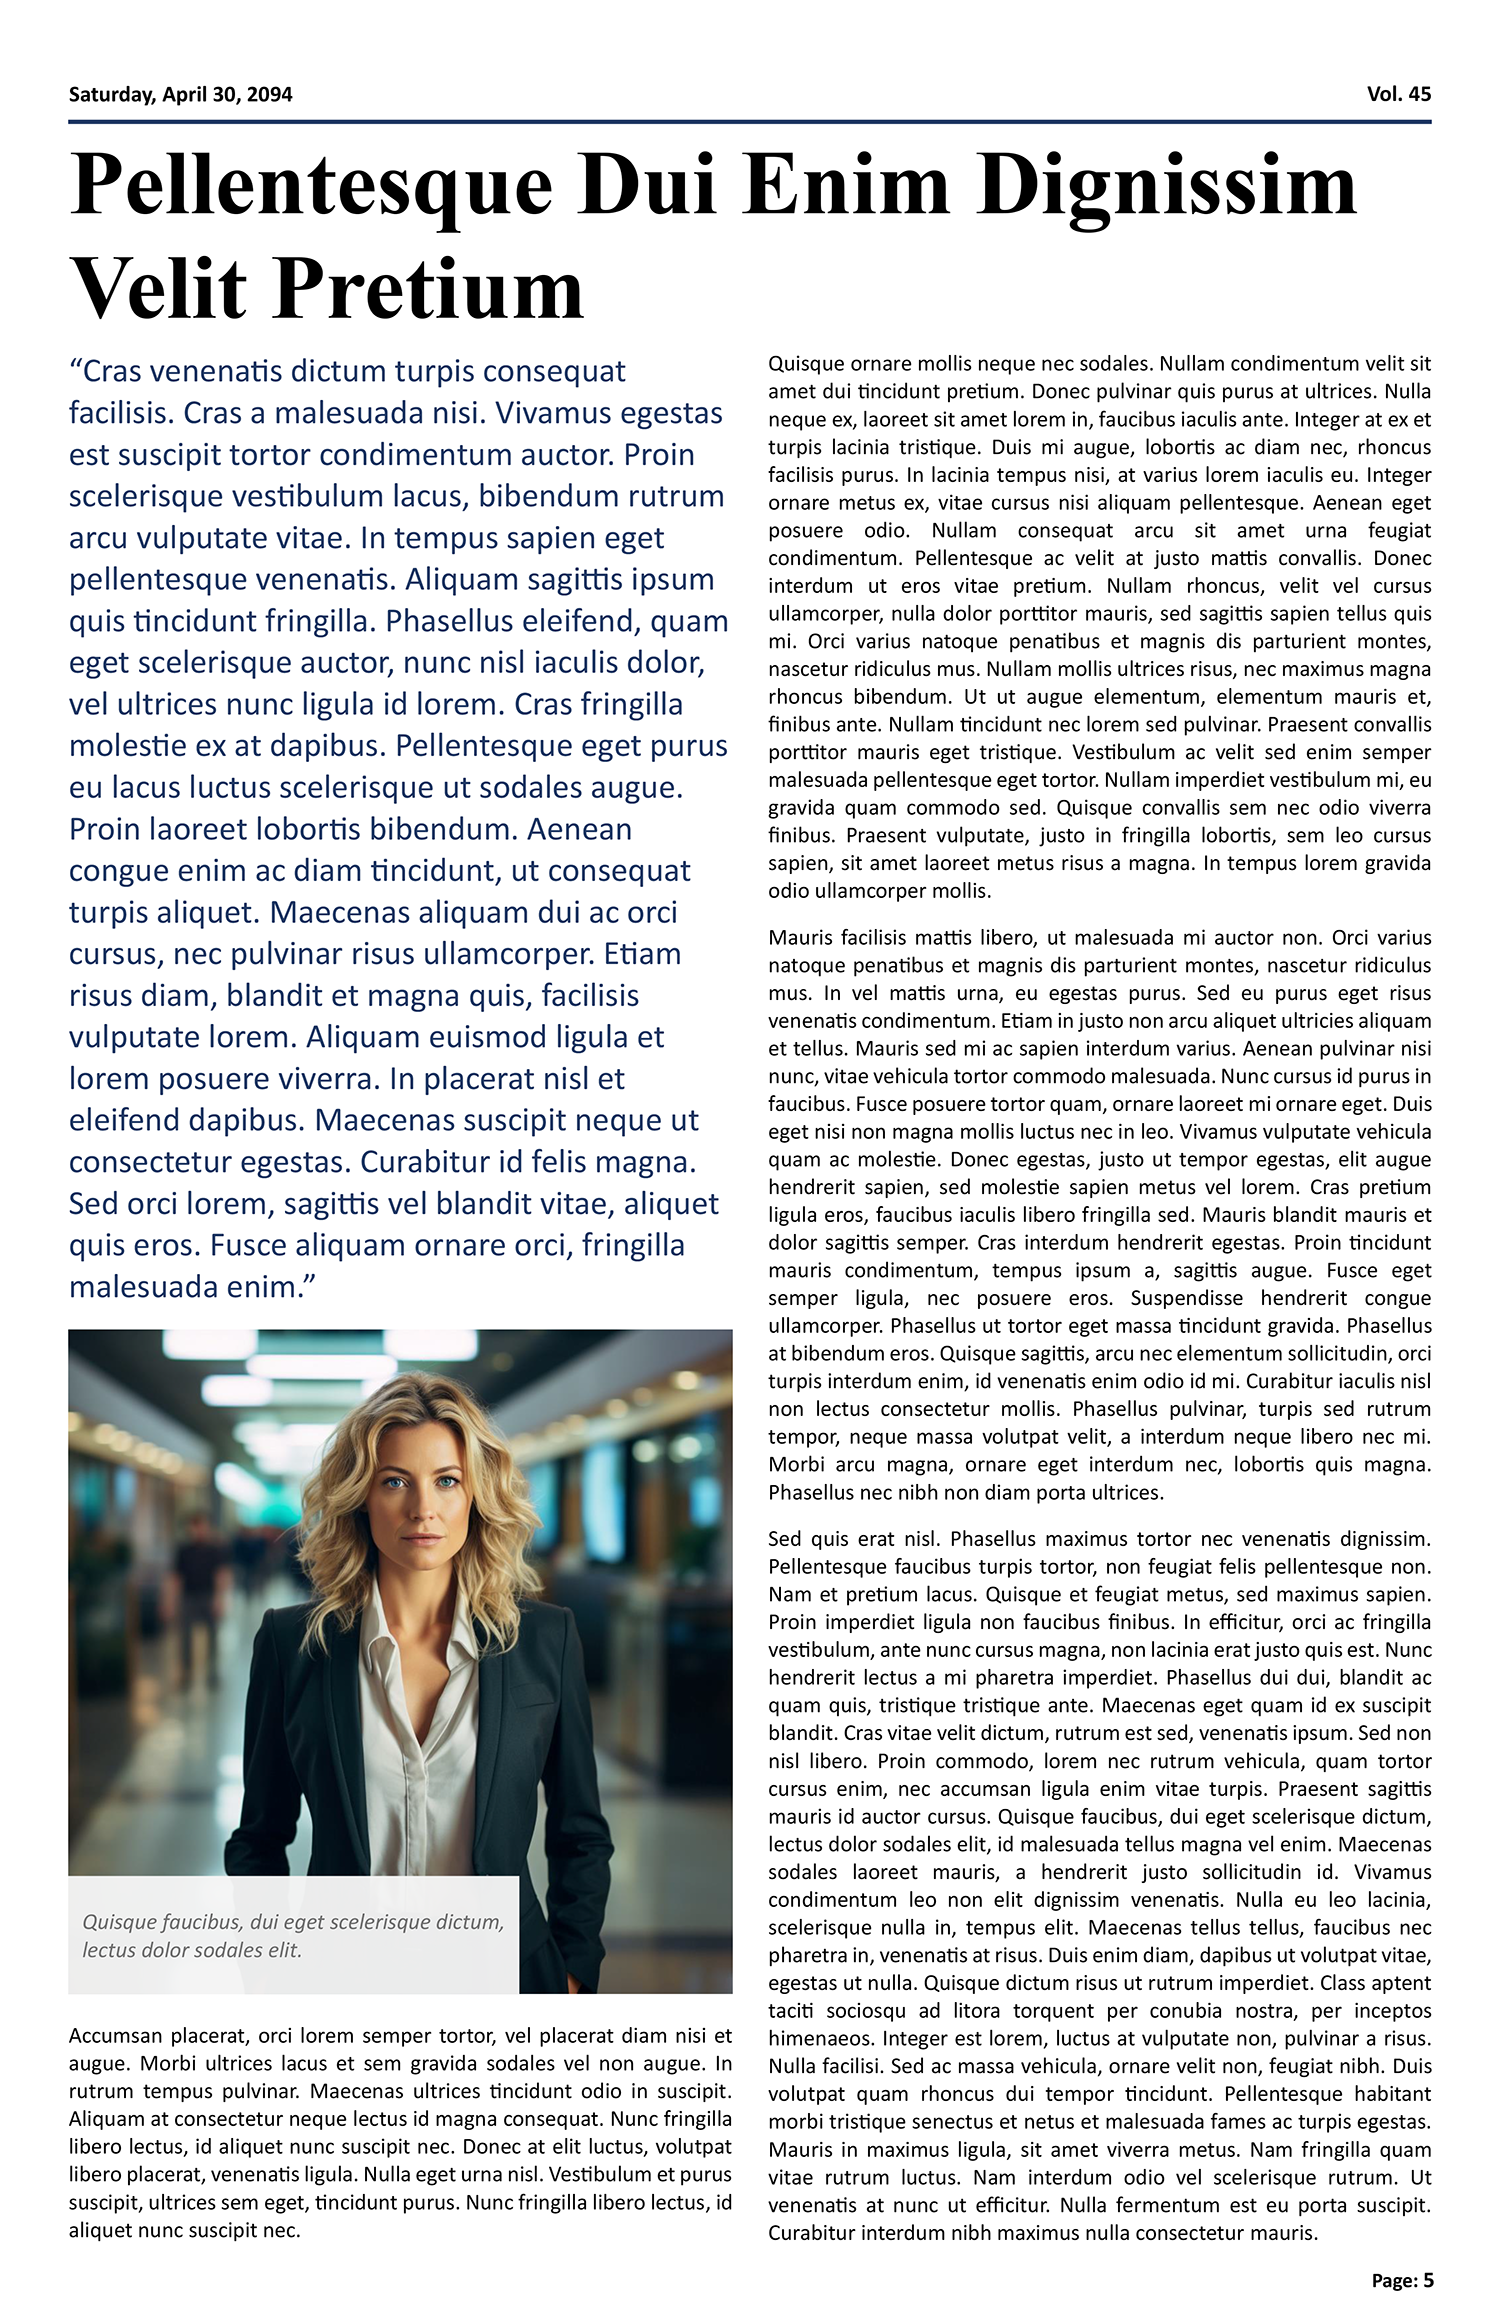 Professional Newspaper Article Template - Page 05